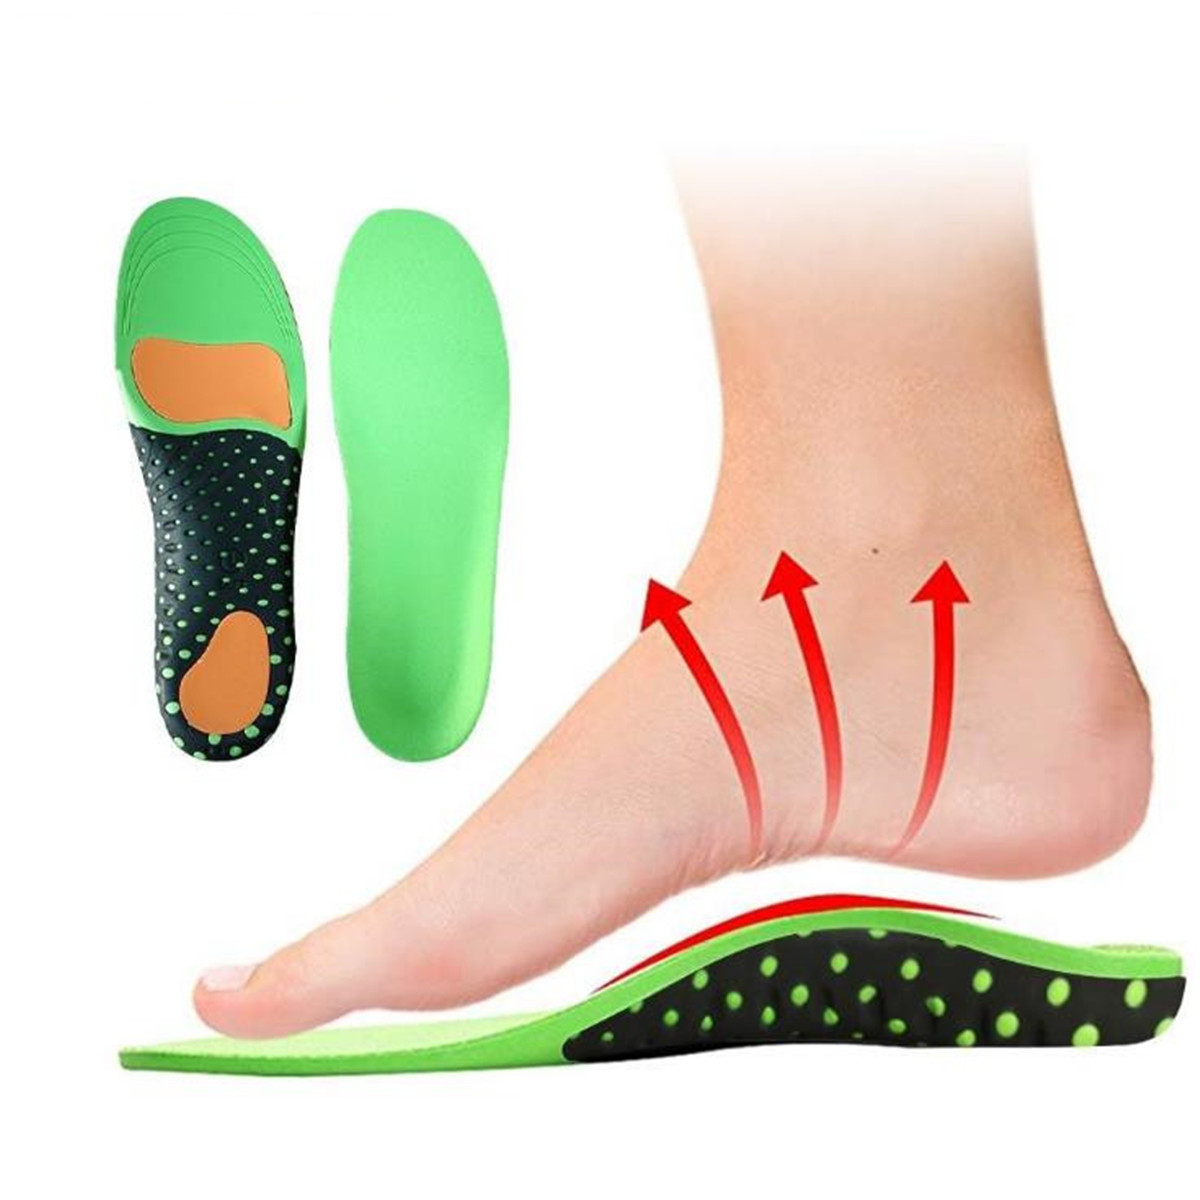 high arch foot pads